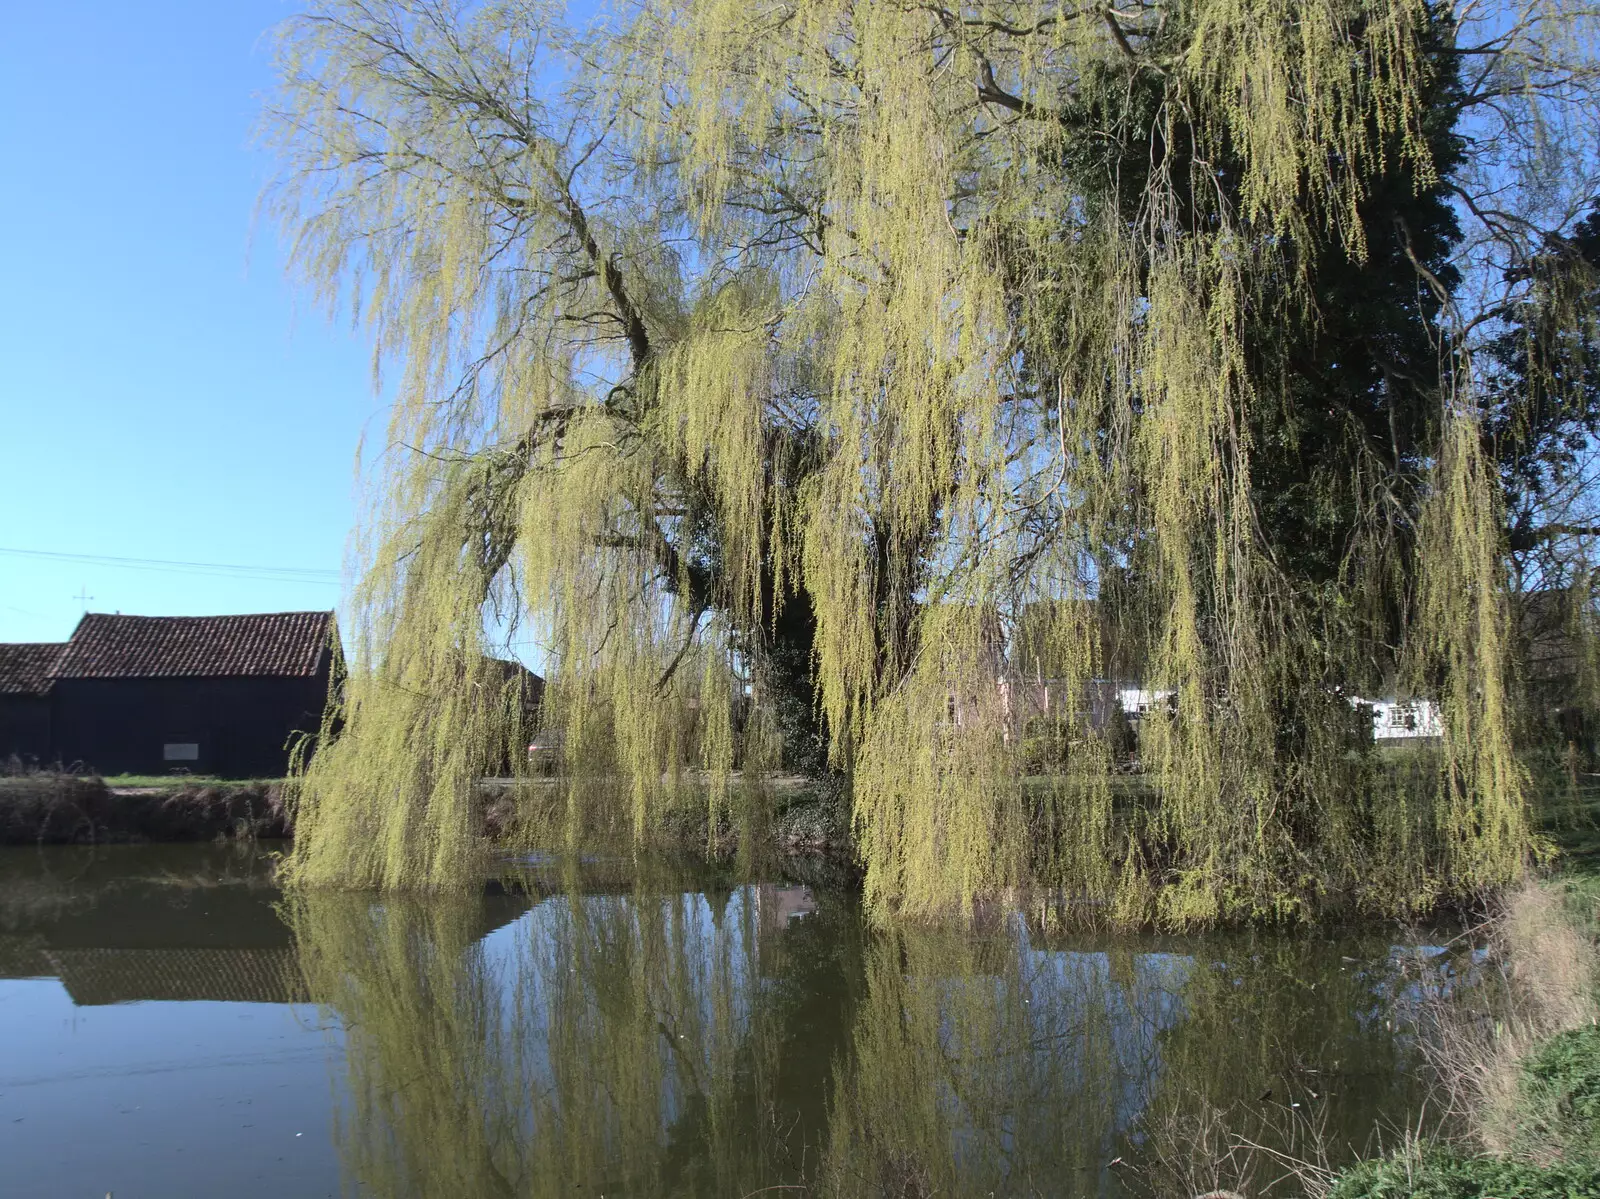 A willow in Thrandeston comes into leaf, from Roadworks and Harry's Trampoline, Brome, Suffolk - 6th April 2021